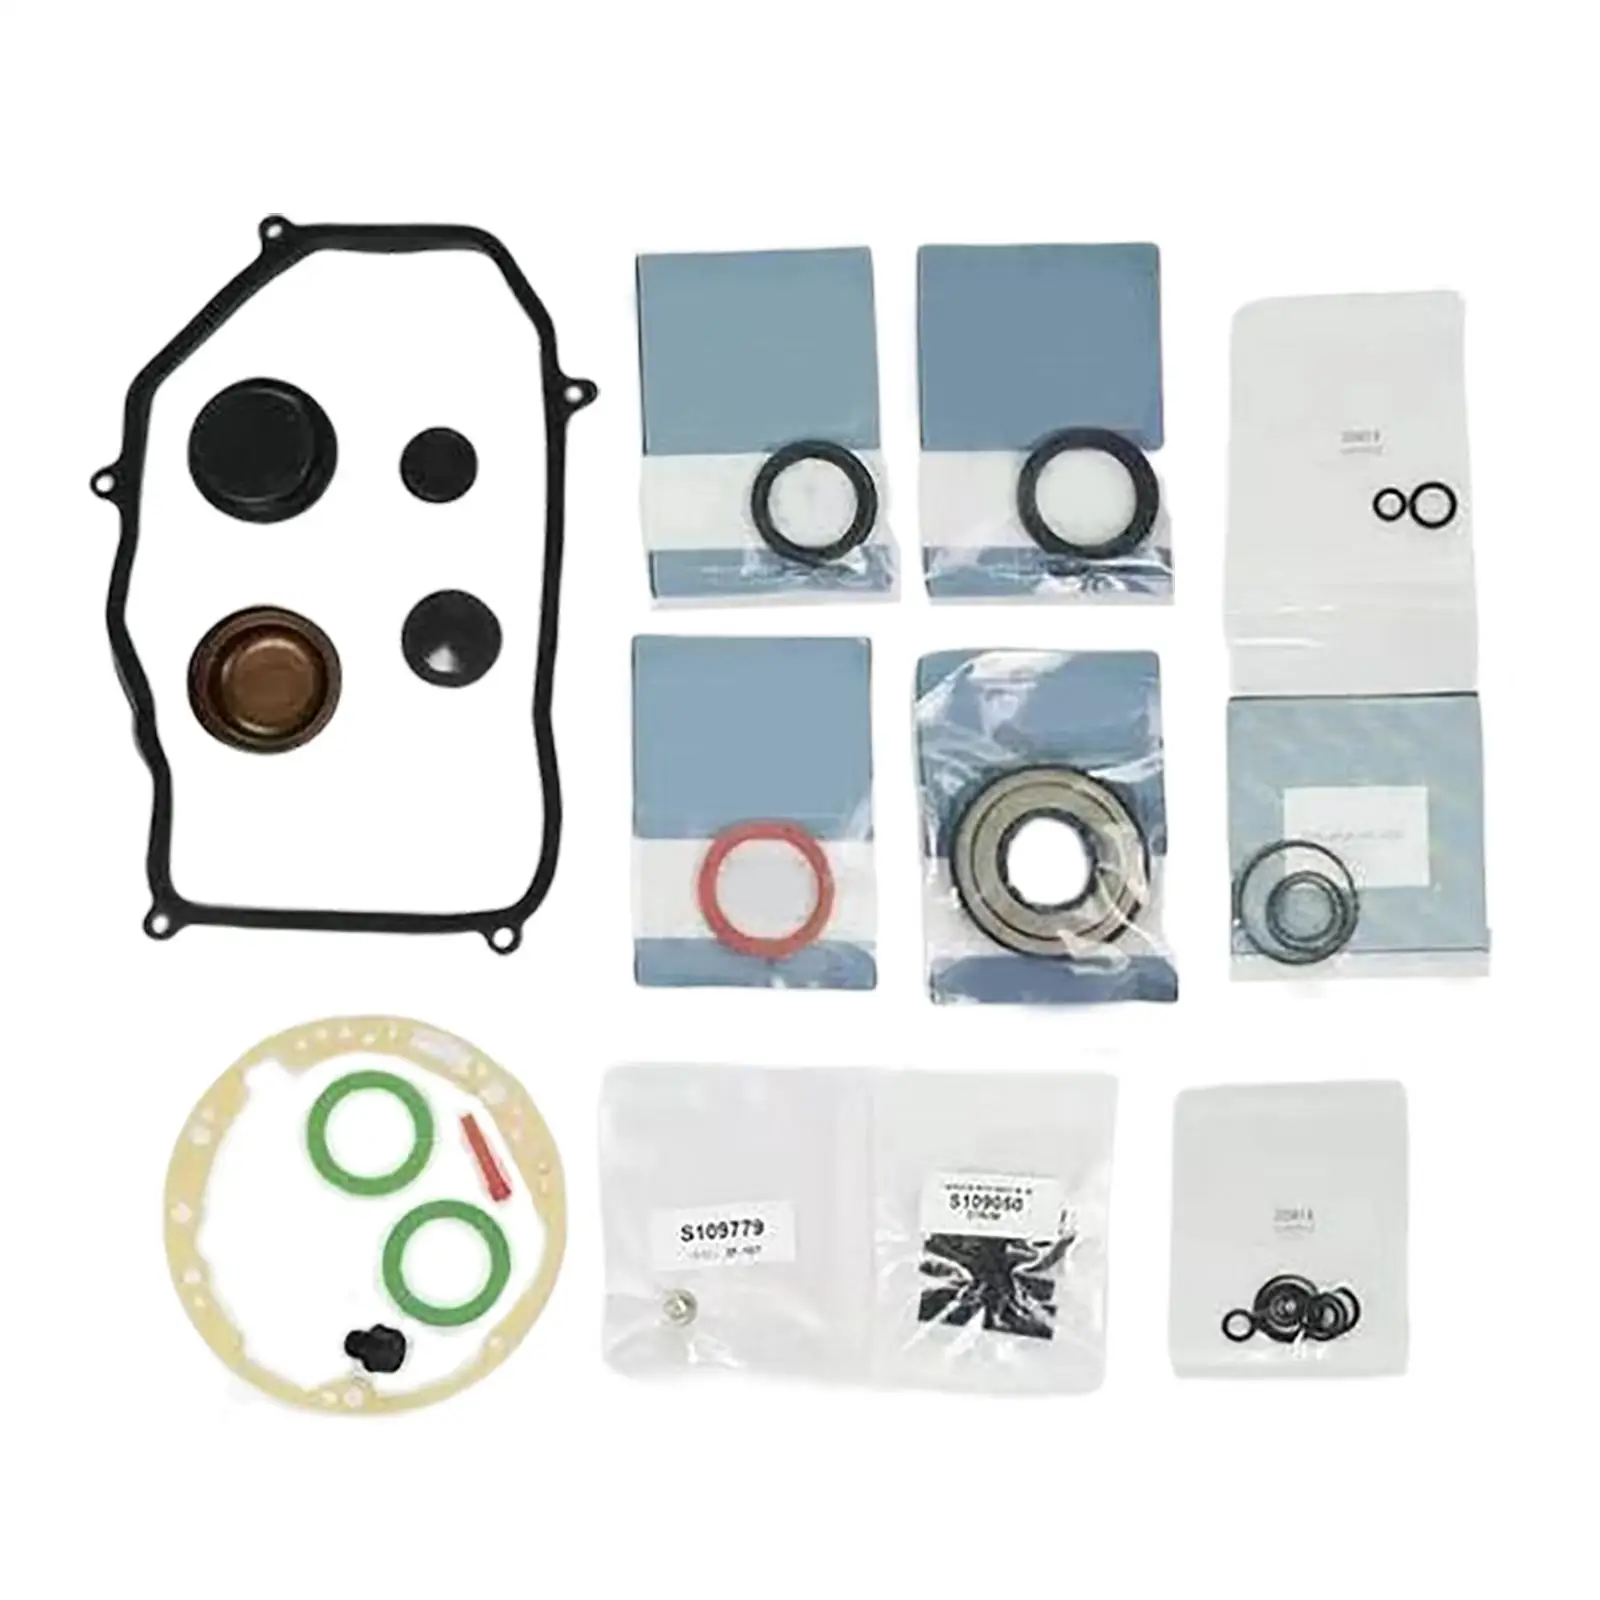 Automatic 01M 4  Transmission Overhaul Seal  Kit  Replacement  Trans MK4 1 001 Vehicle Parts, Car Supplies